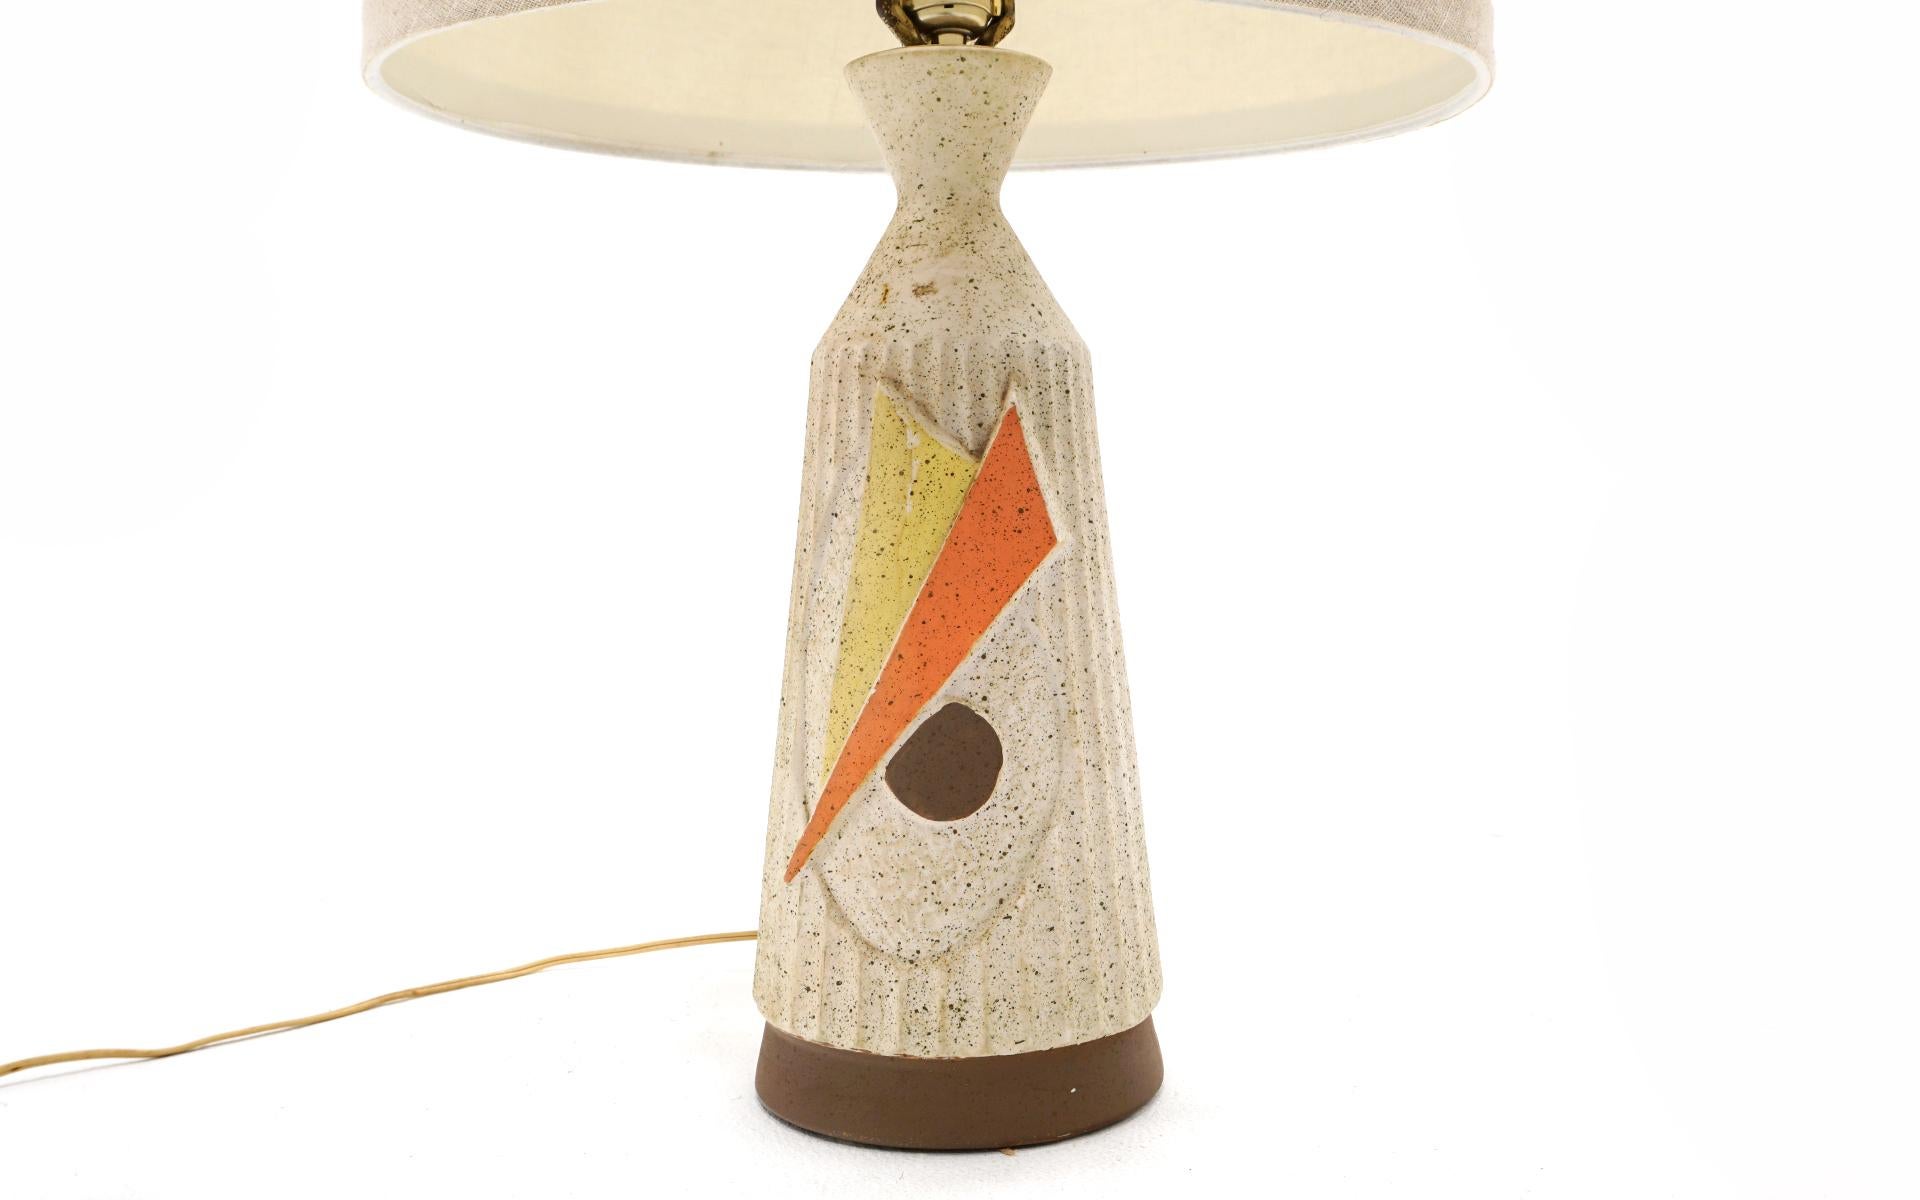 Ceramic table lamp in off white with abstract orange, yellow and brown design. Similar in style to lamps designed by Gordon and Jane Martz for Marshall Studios. Comes with the original shade. Very good condition with no chips, cracks, or repairs.